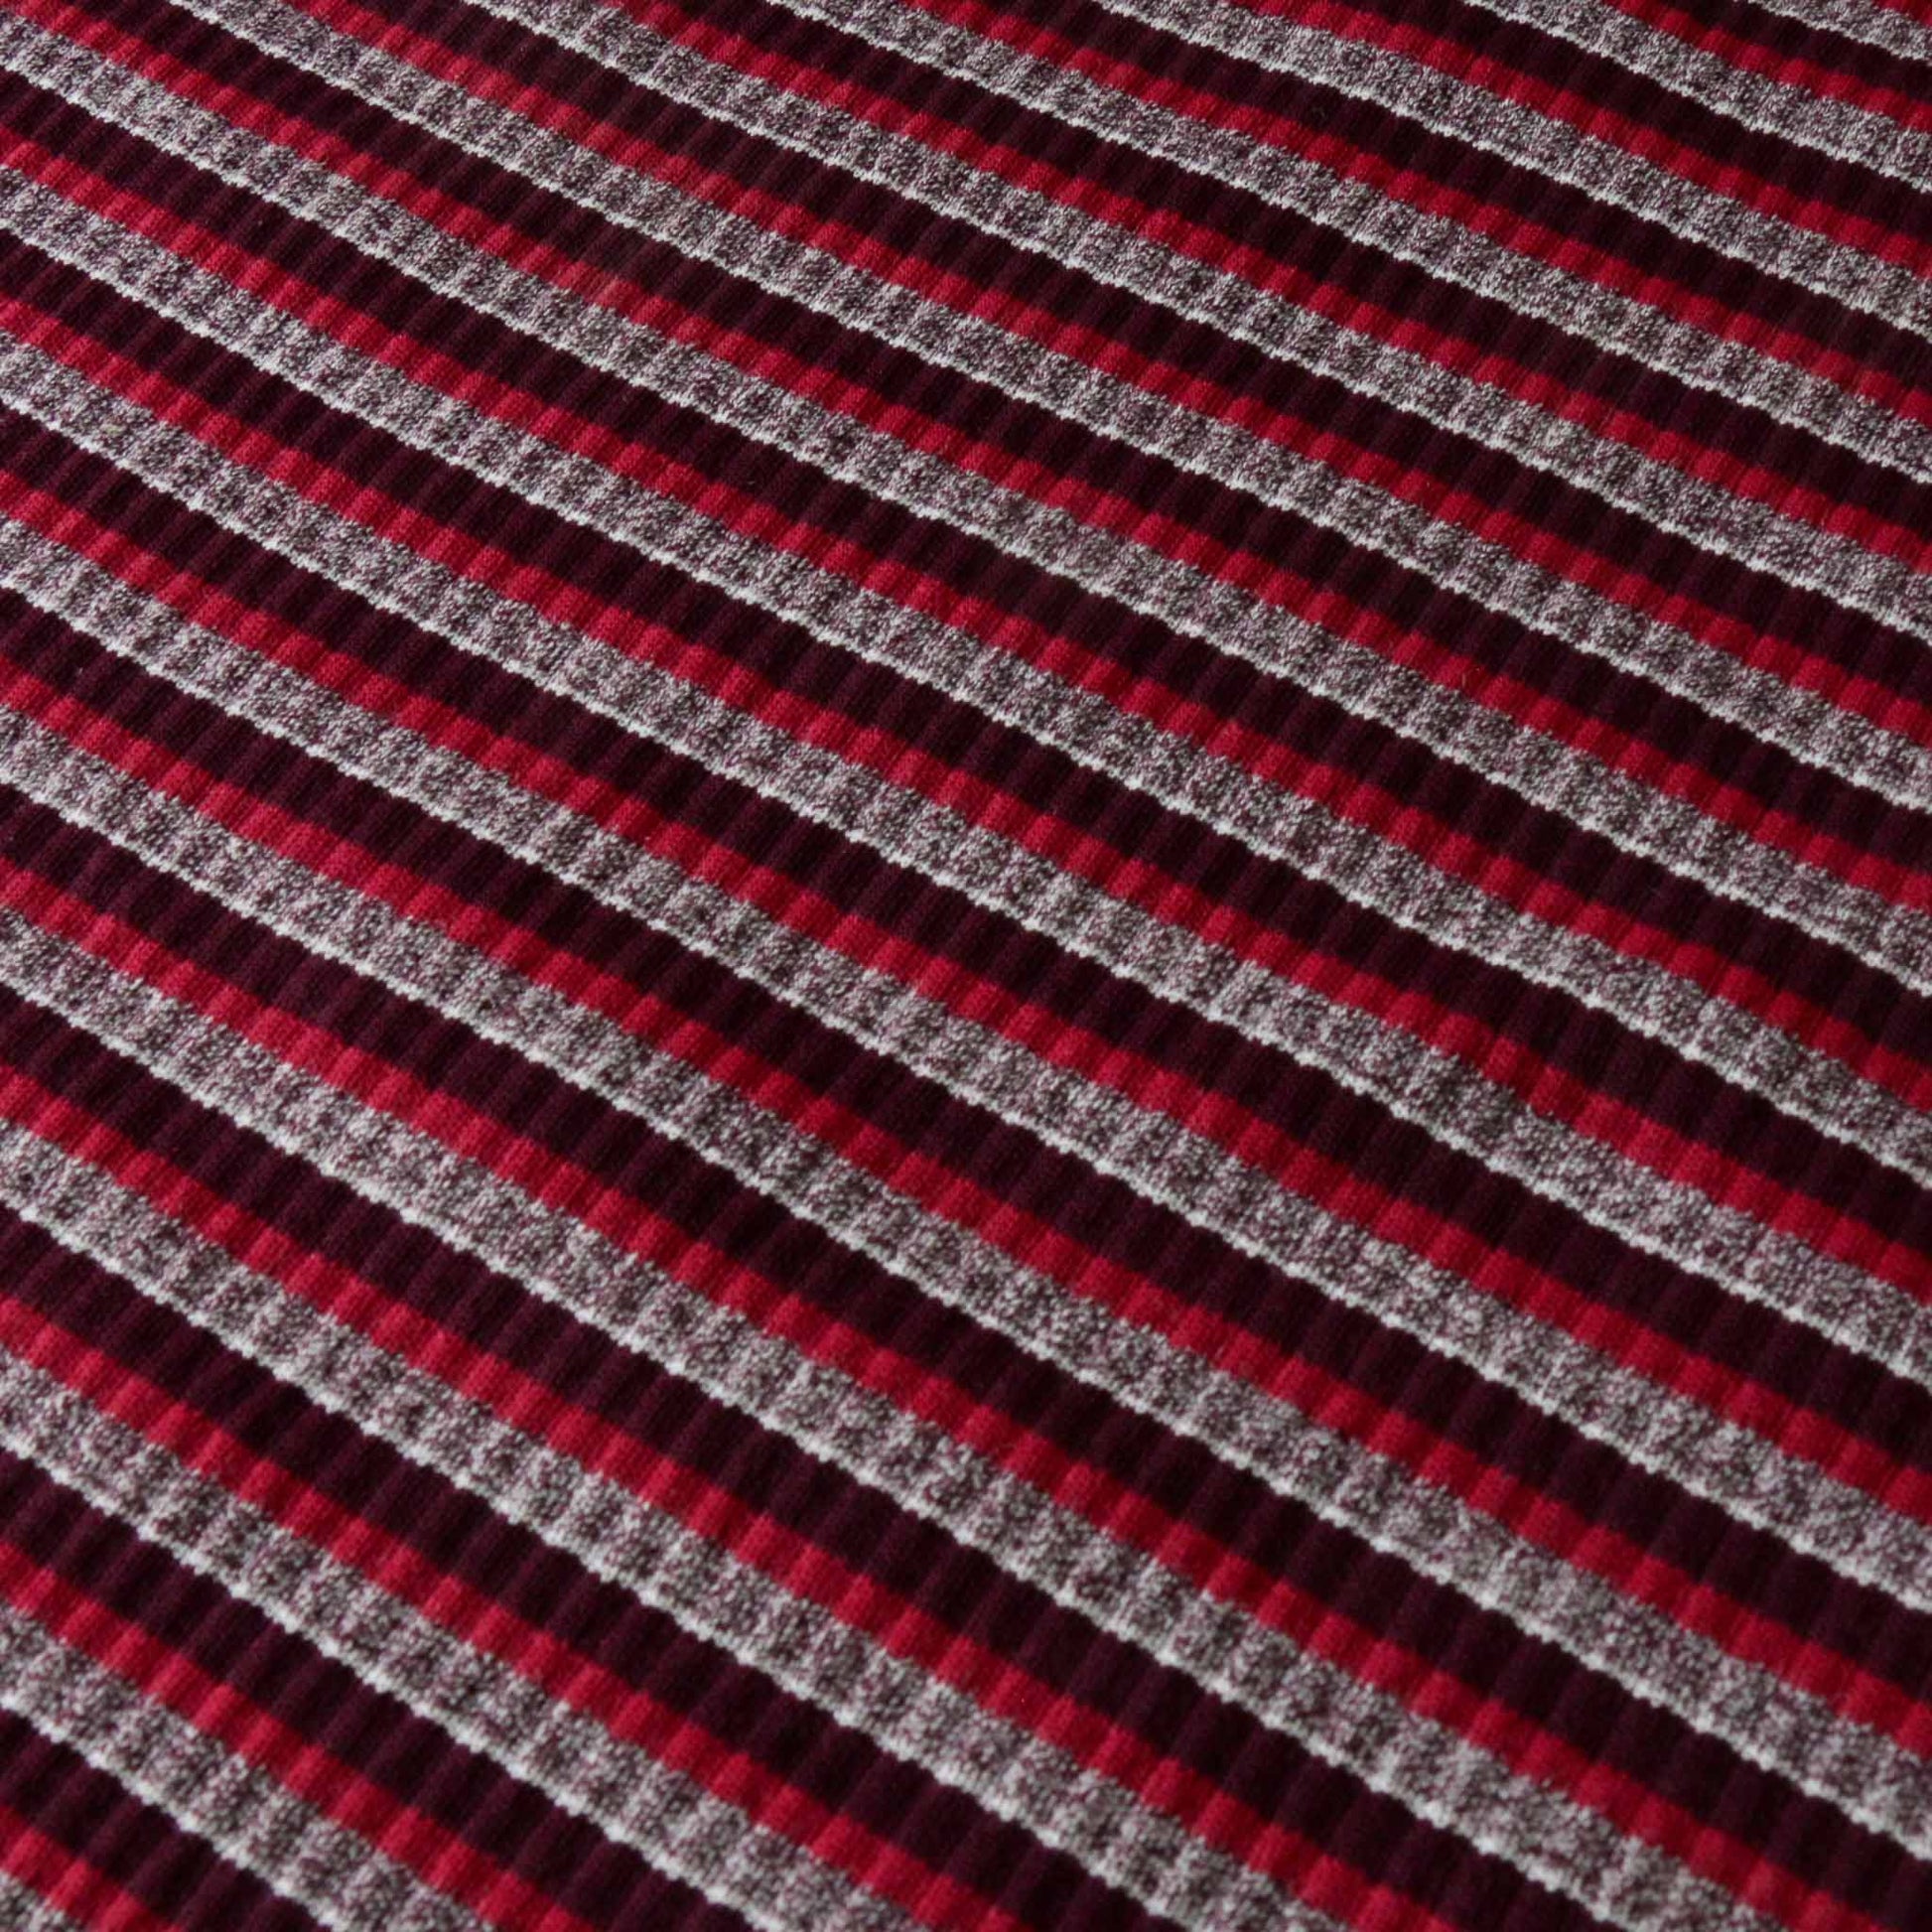 striped rib jersey knit dressmaking fabric with striped design in maroon pink and grey